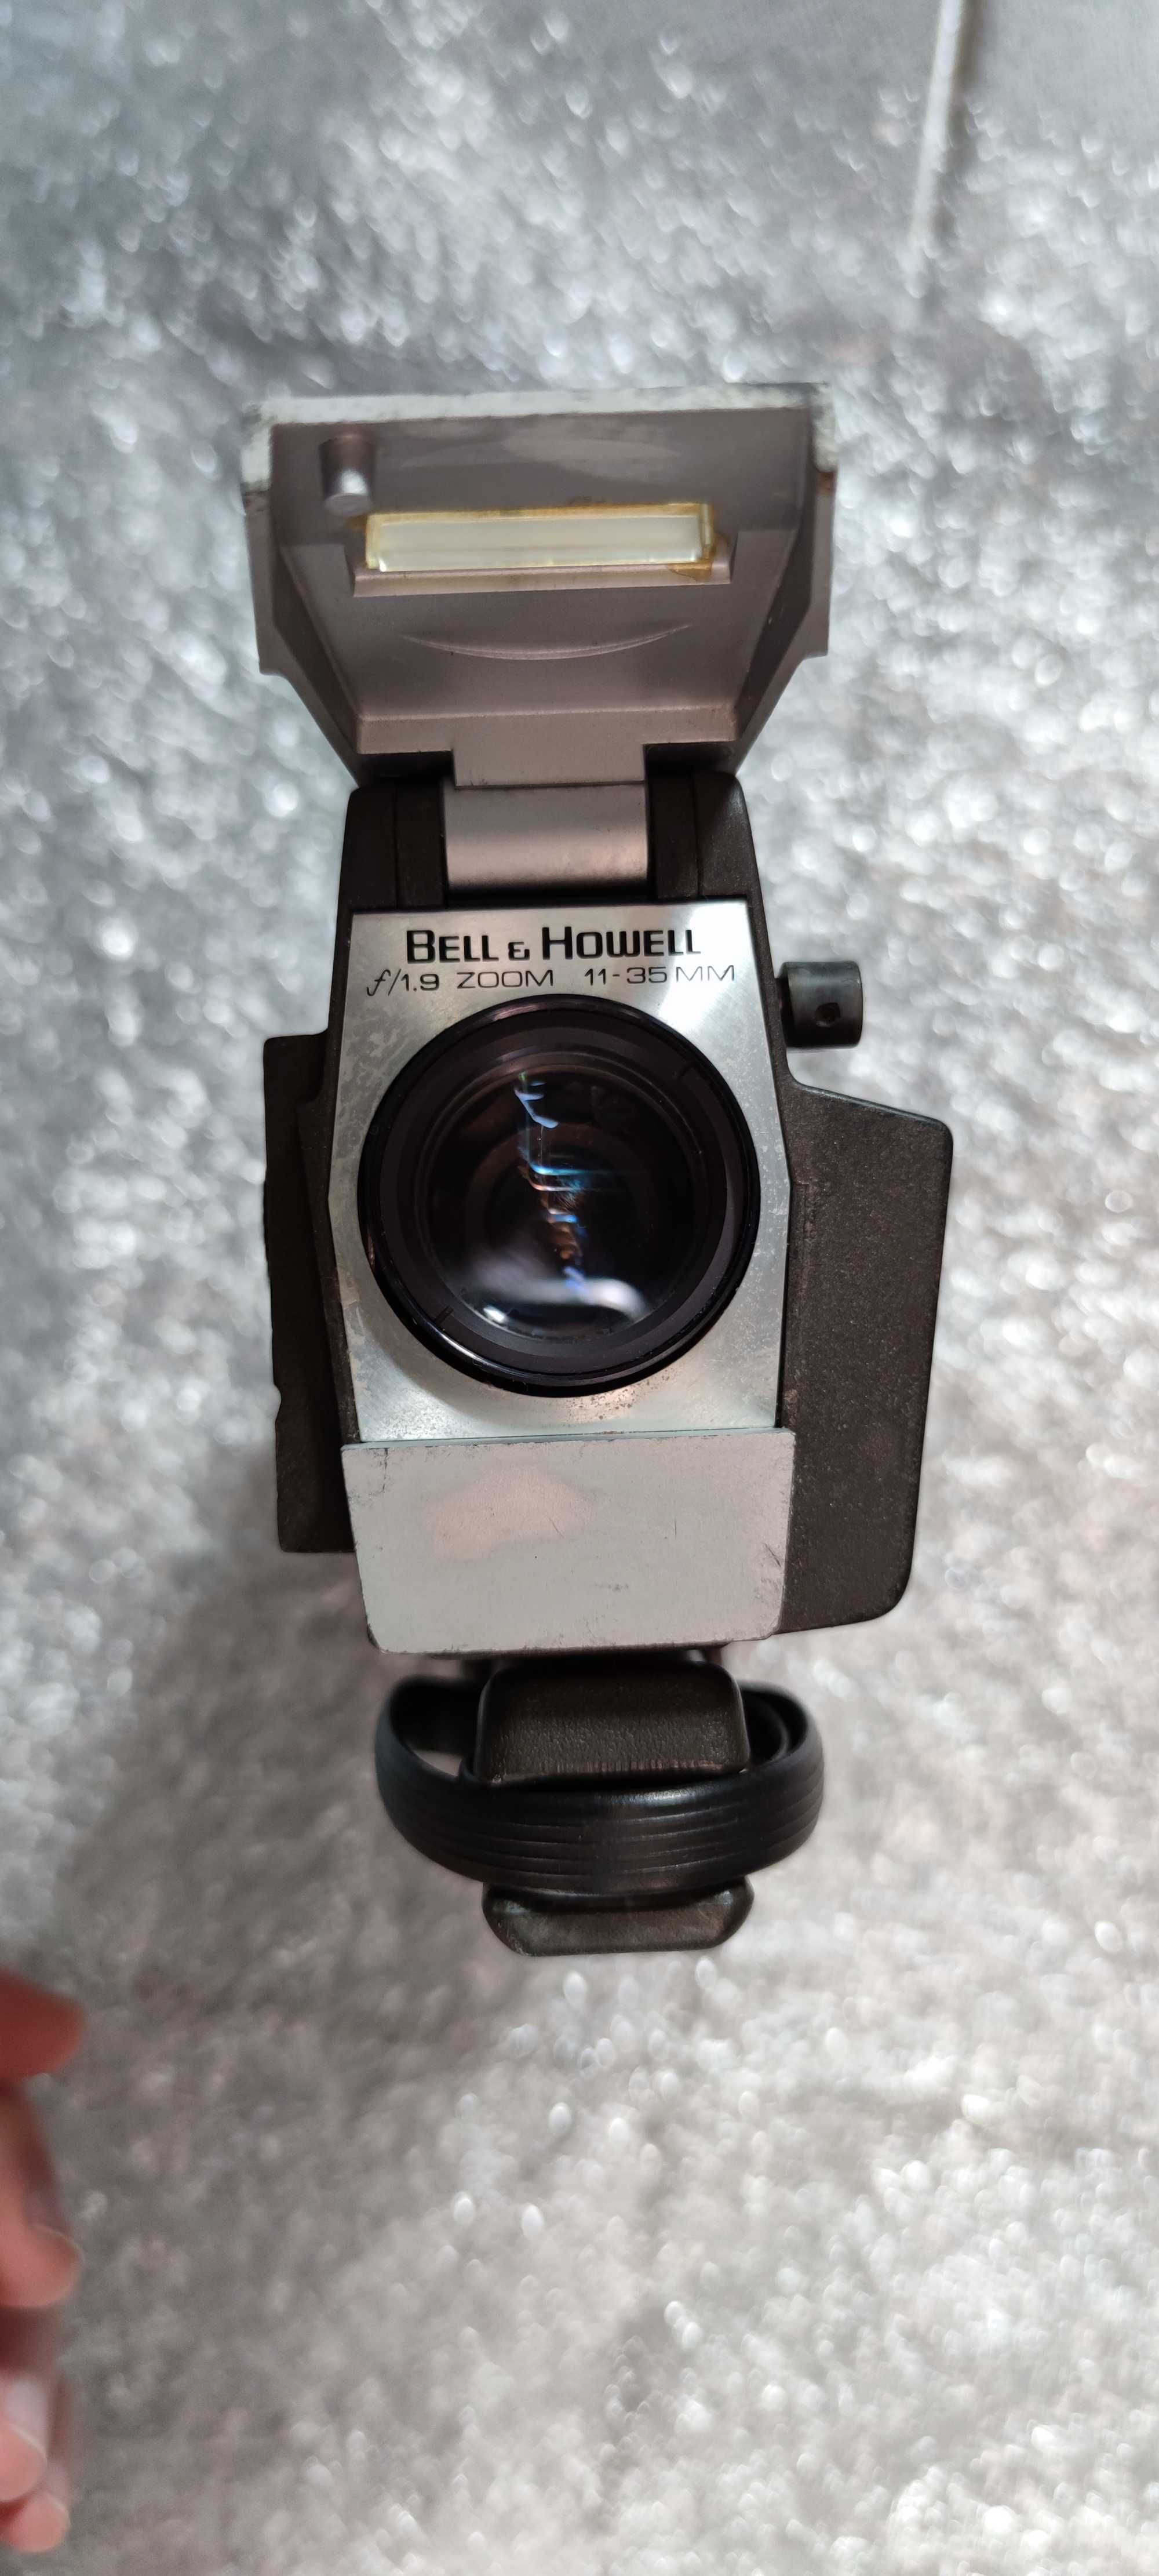 Bell & Howell Autoload Model 442 PS Optronic Eye Camera Vintage